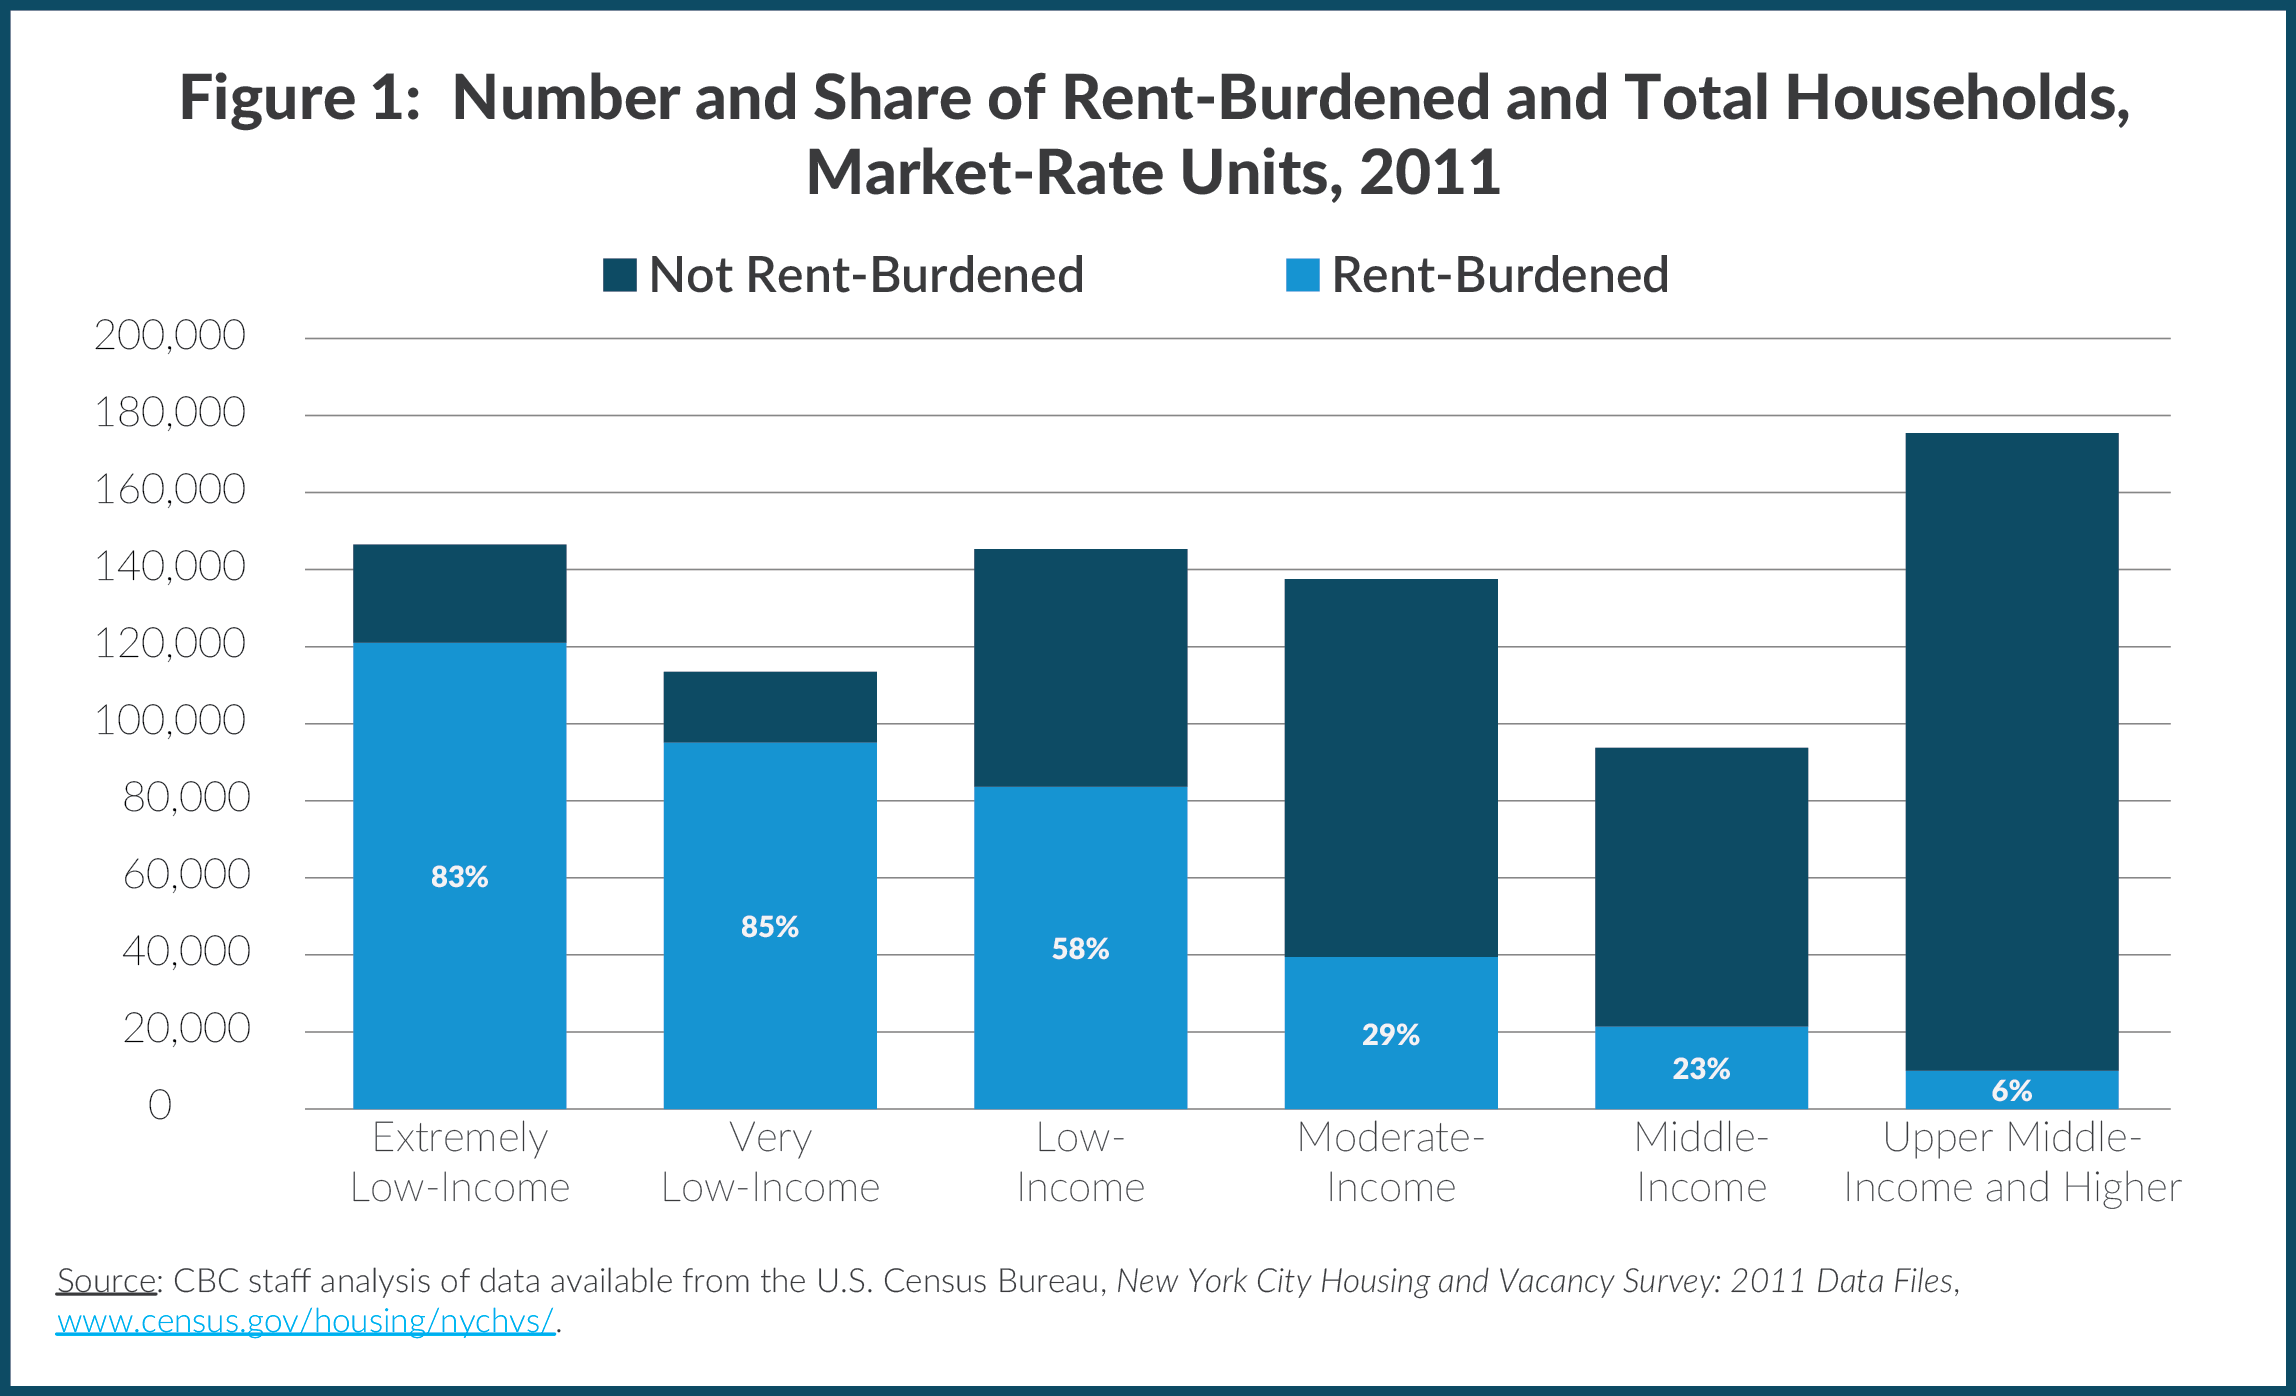 Stacked bar chart showing number and share of rent-burdened and total households in market rate units in New York City, 2011